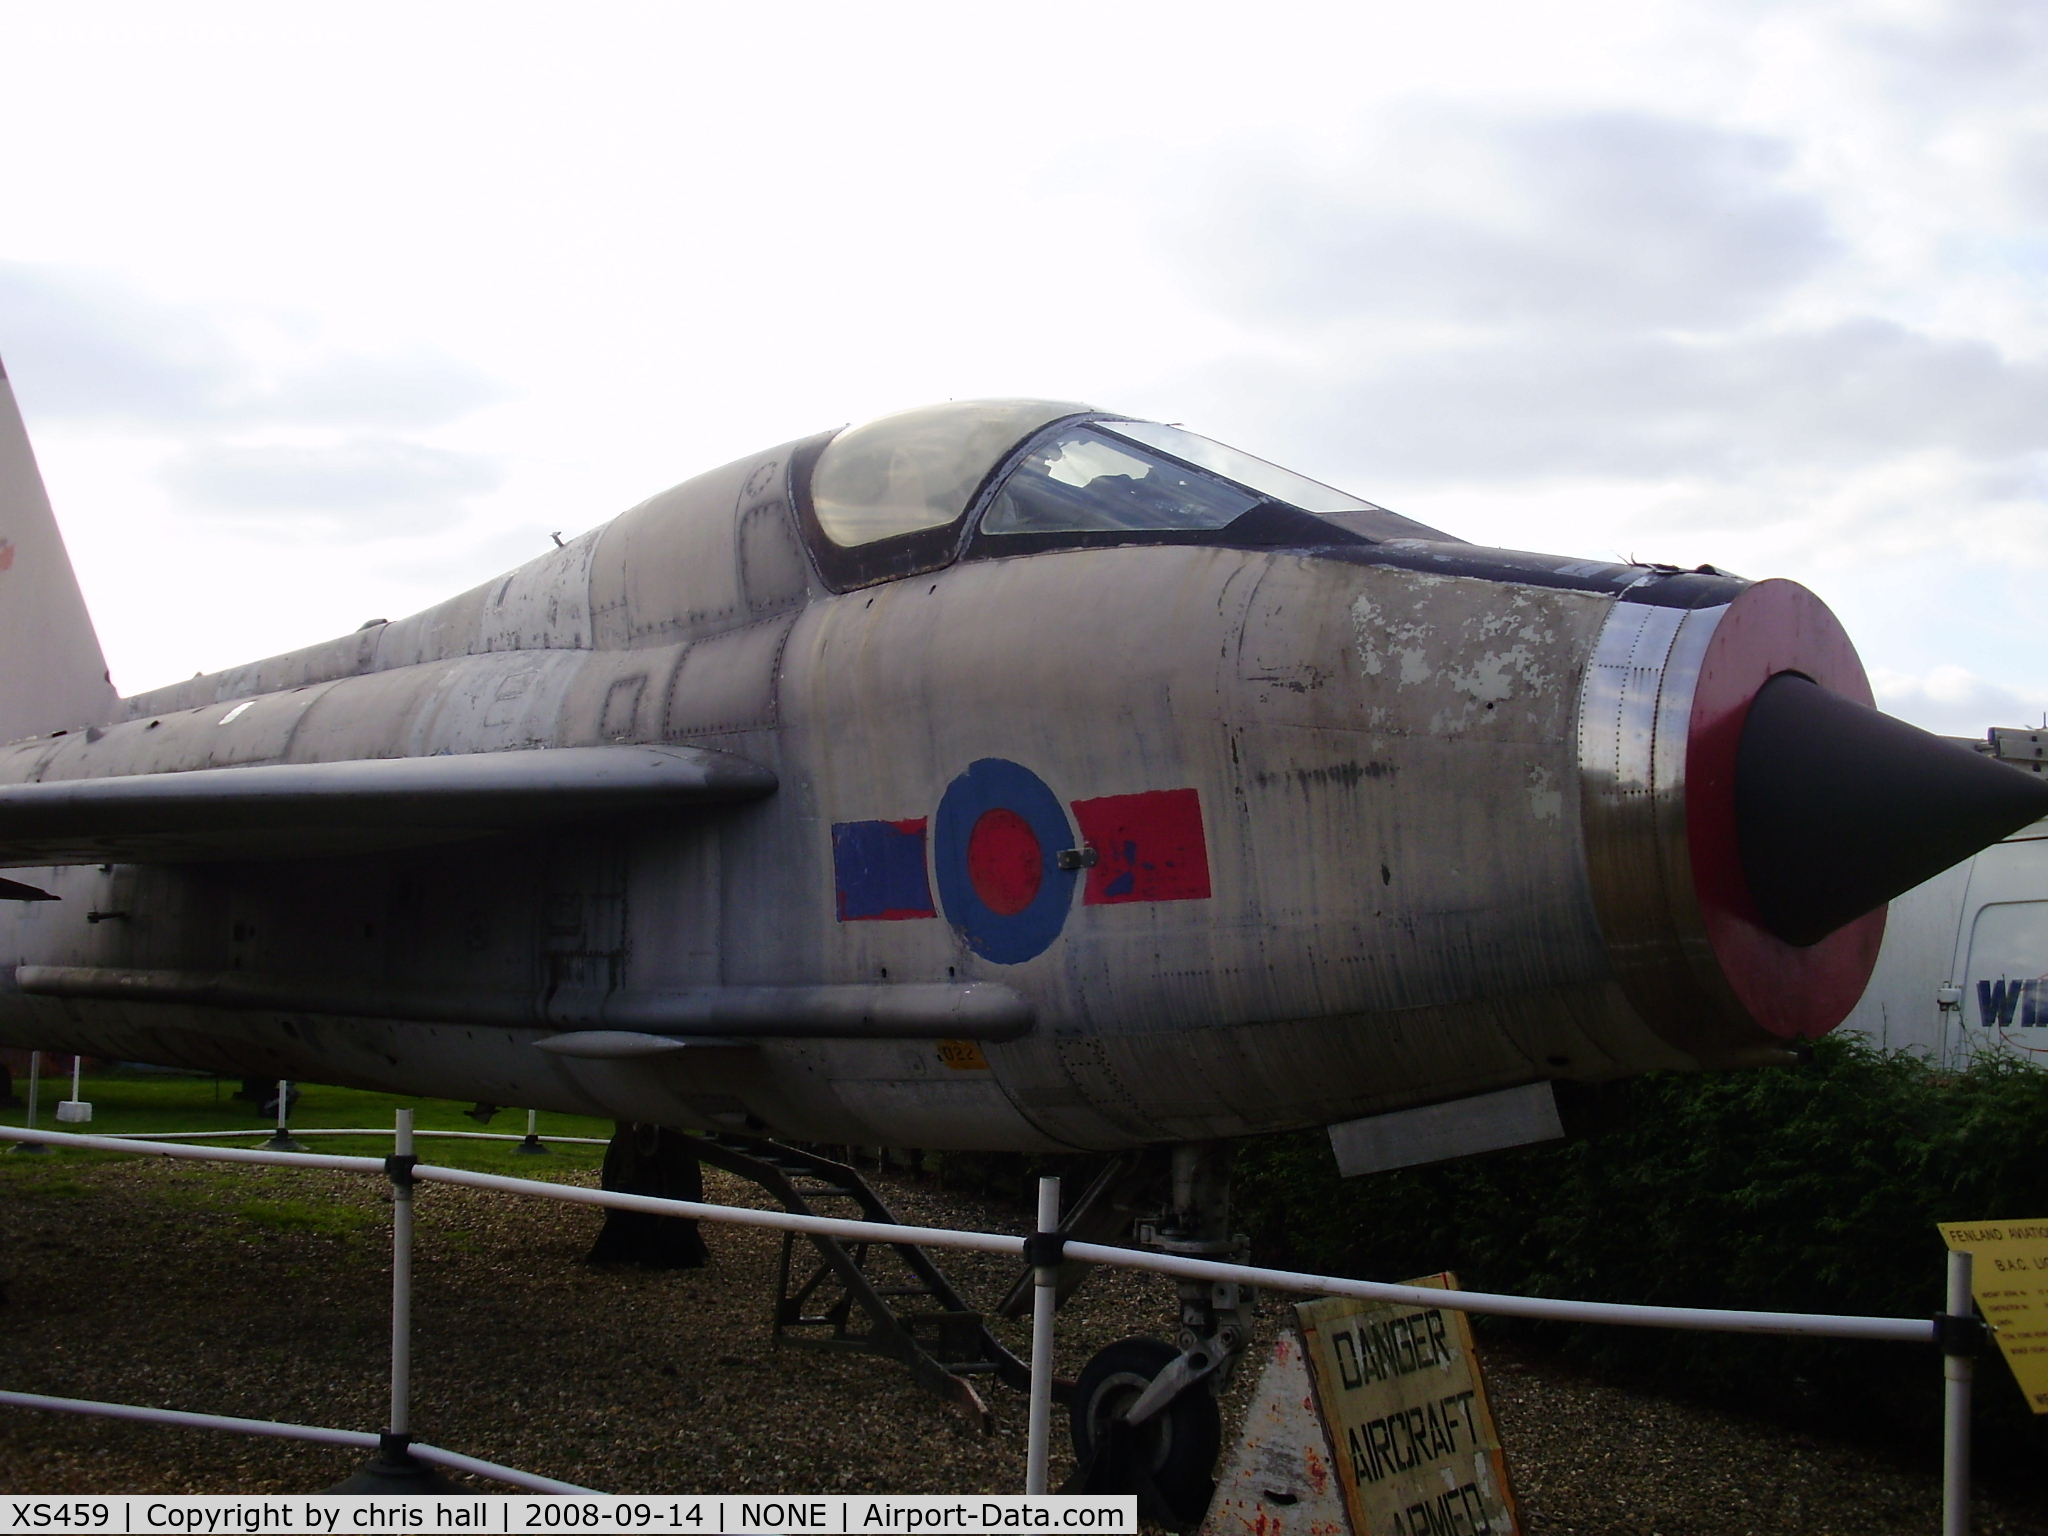 XS459, English Electric Lightning T.5 C/N 95019, preserved at the Fenland & West Norfolk Aviation Museum